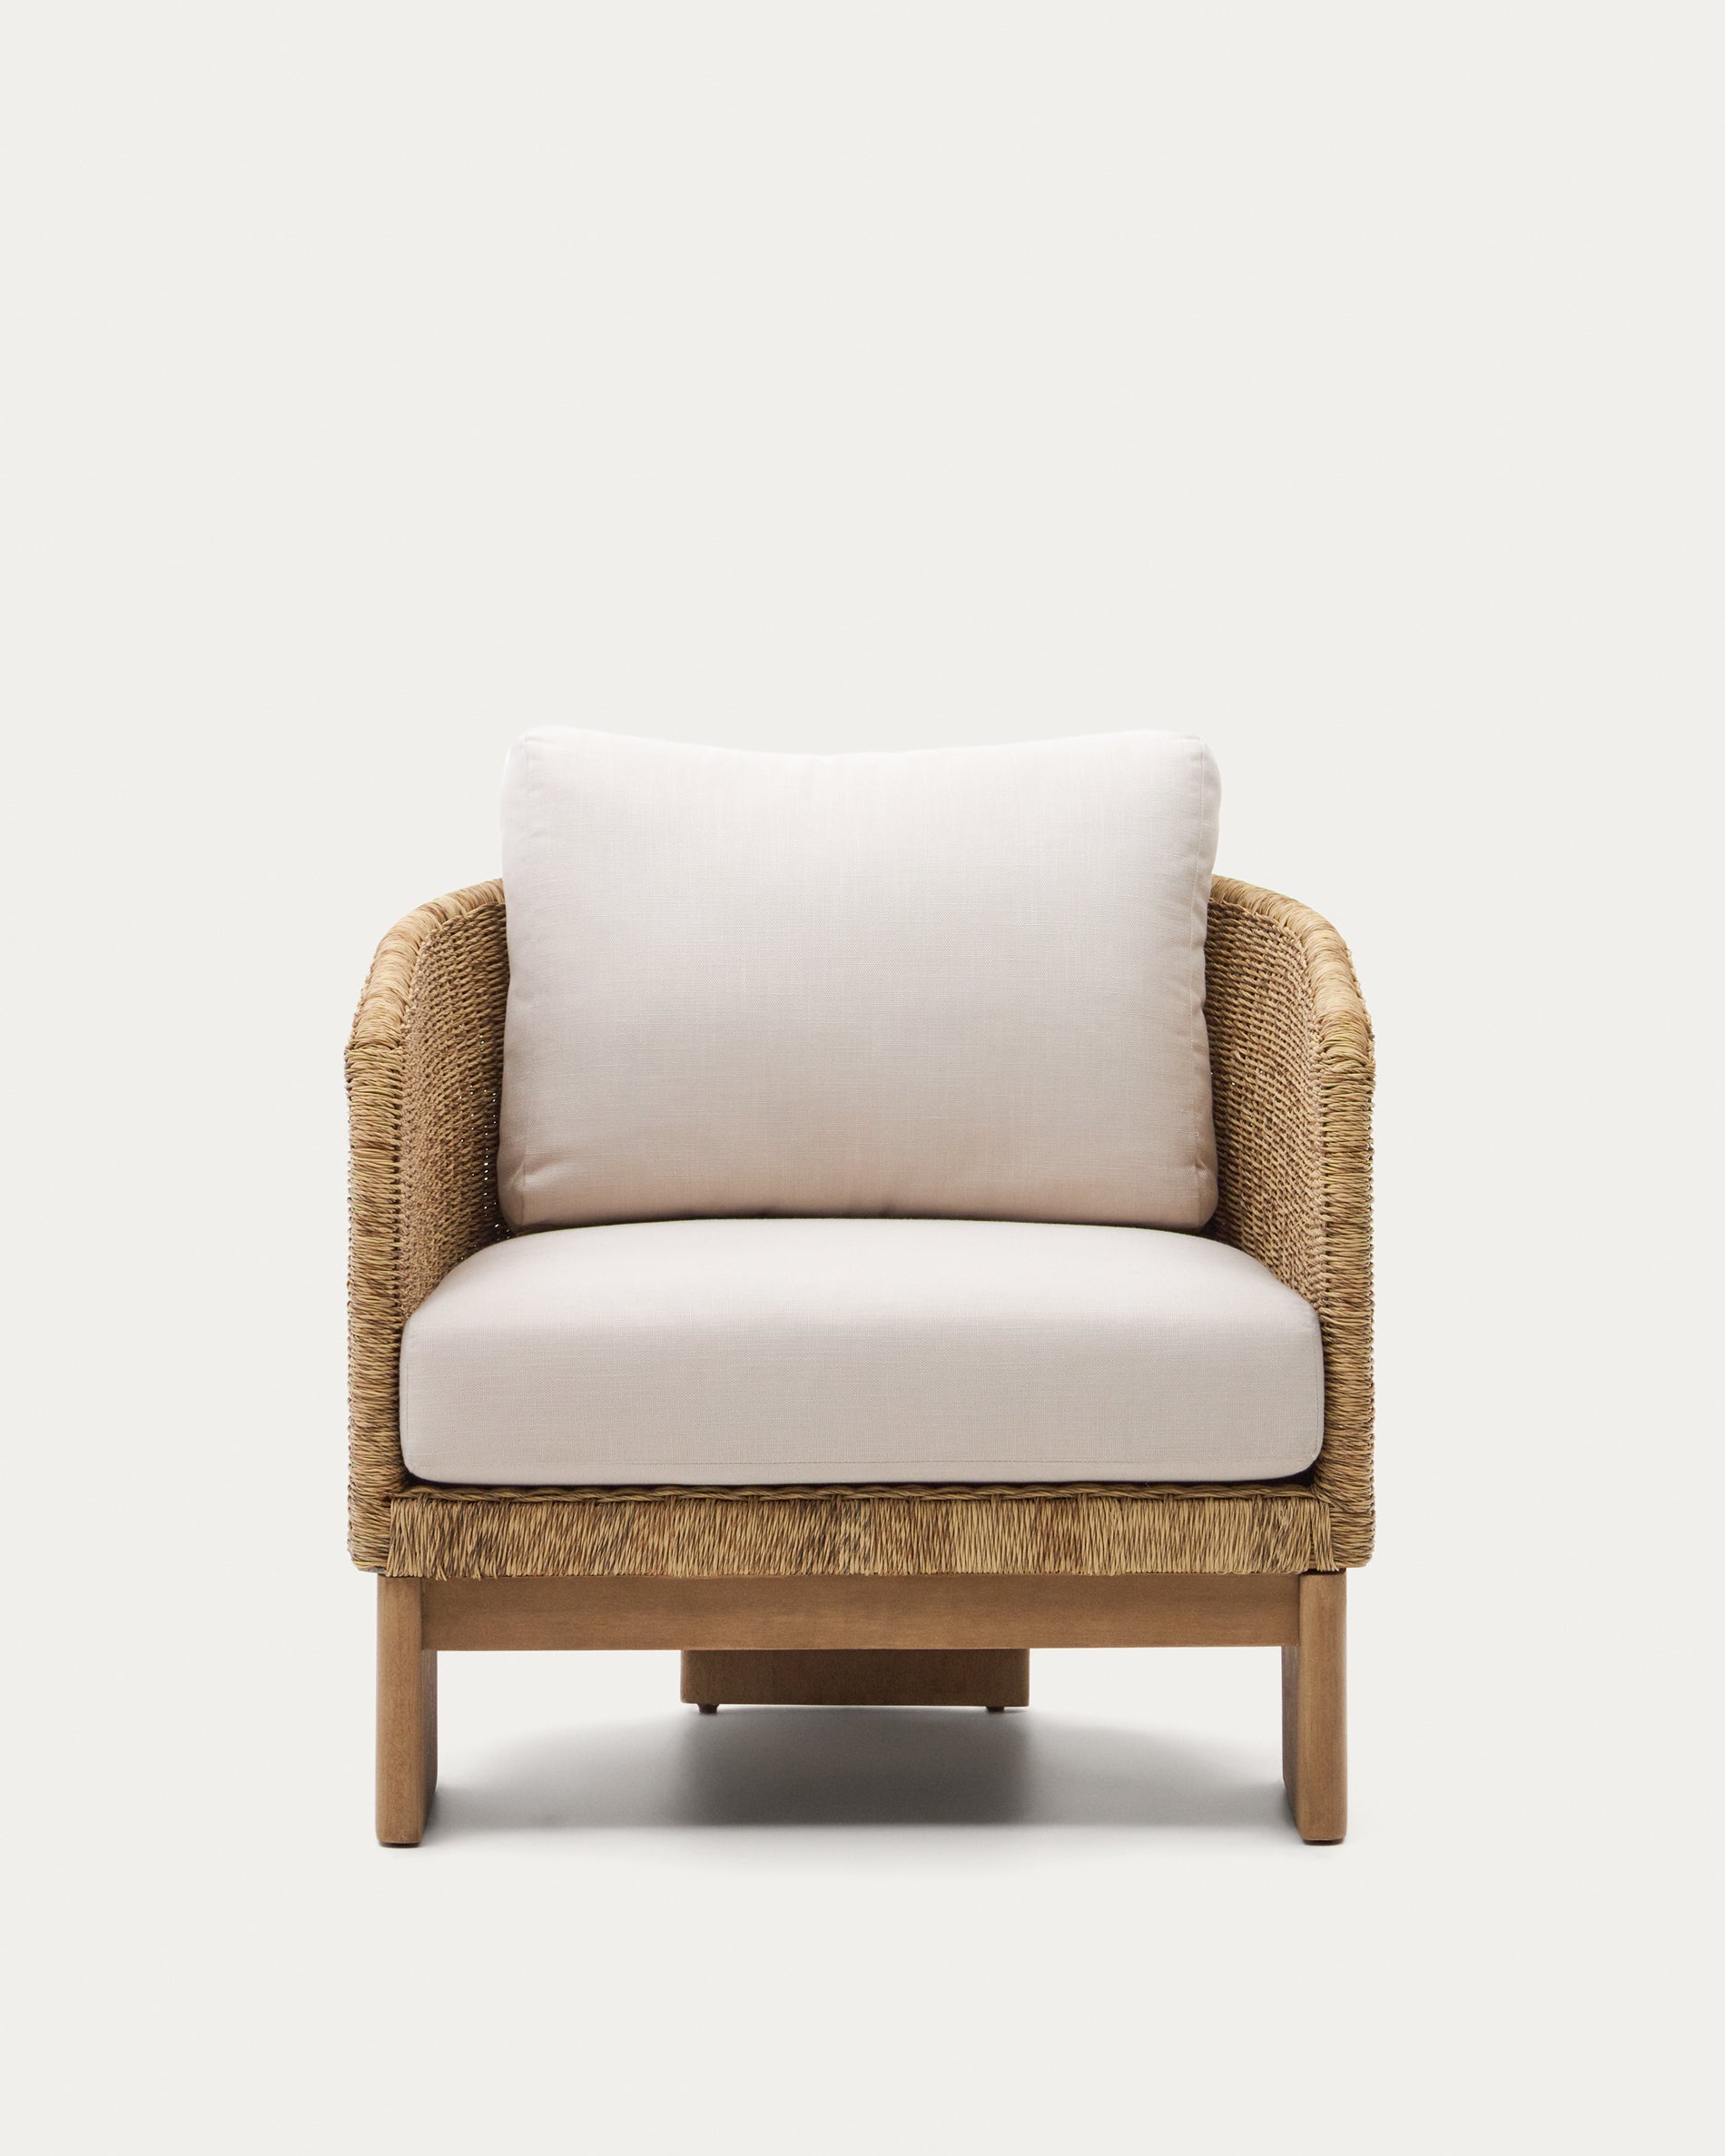 Xoriguer armchair made of artificial rattan and 100% FSC certified solid eucalyptus wood